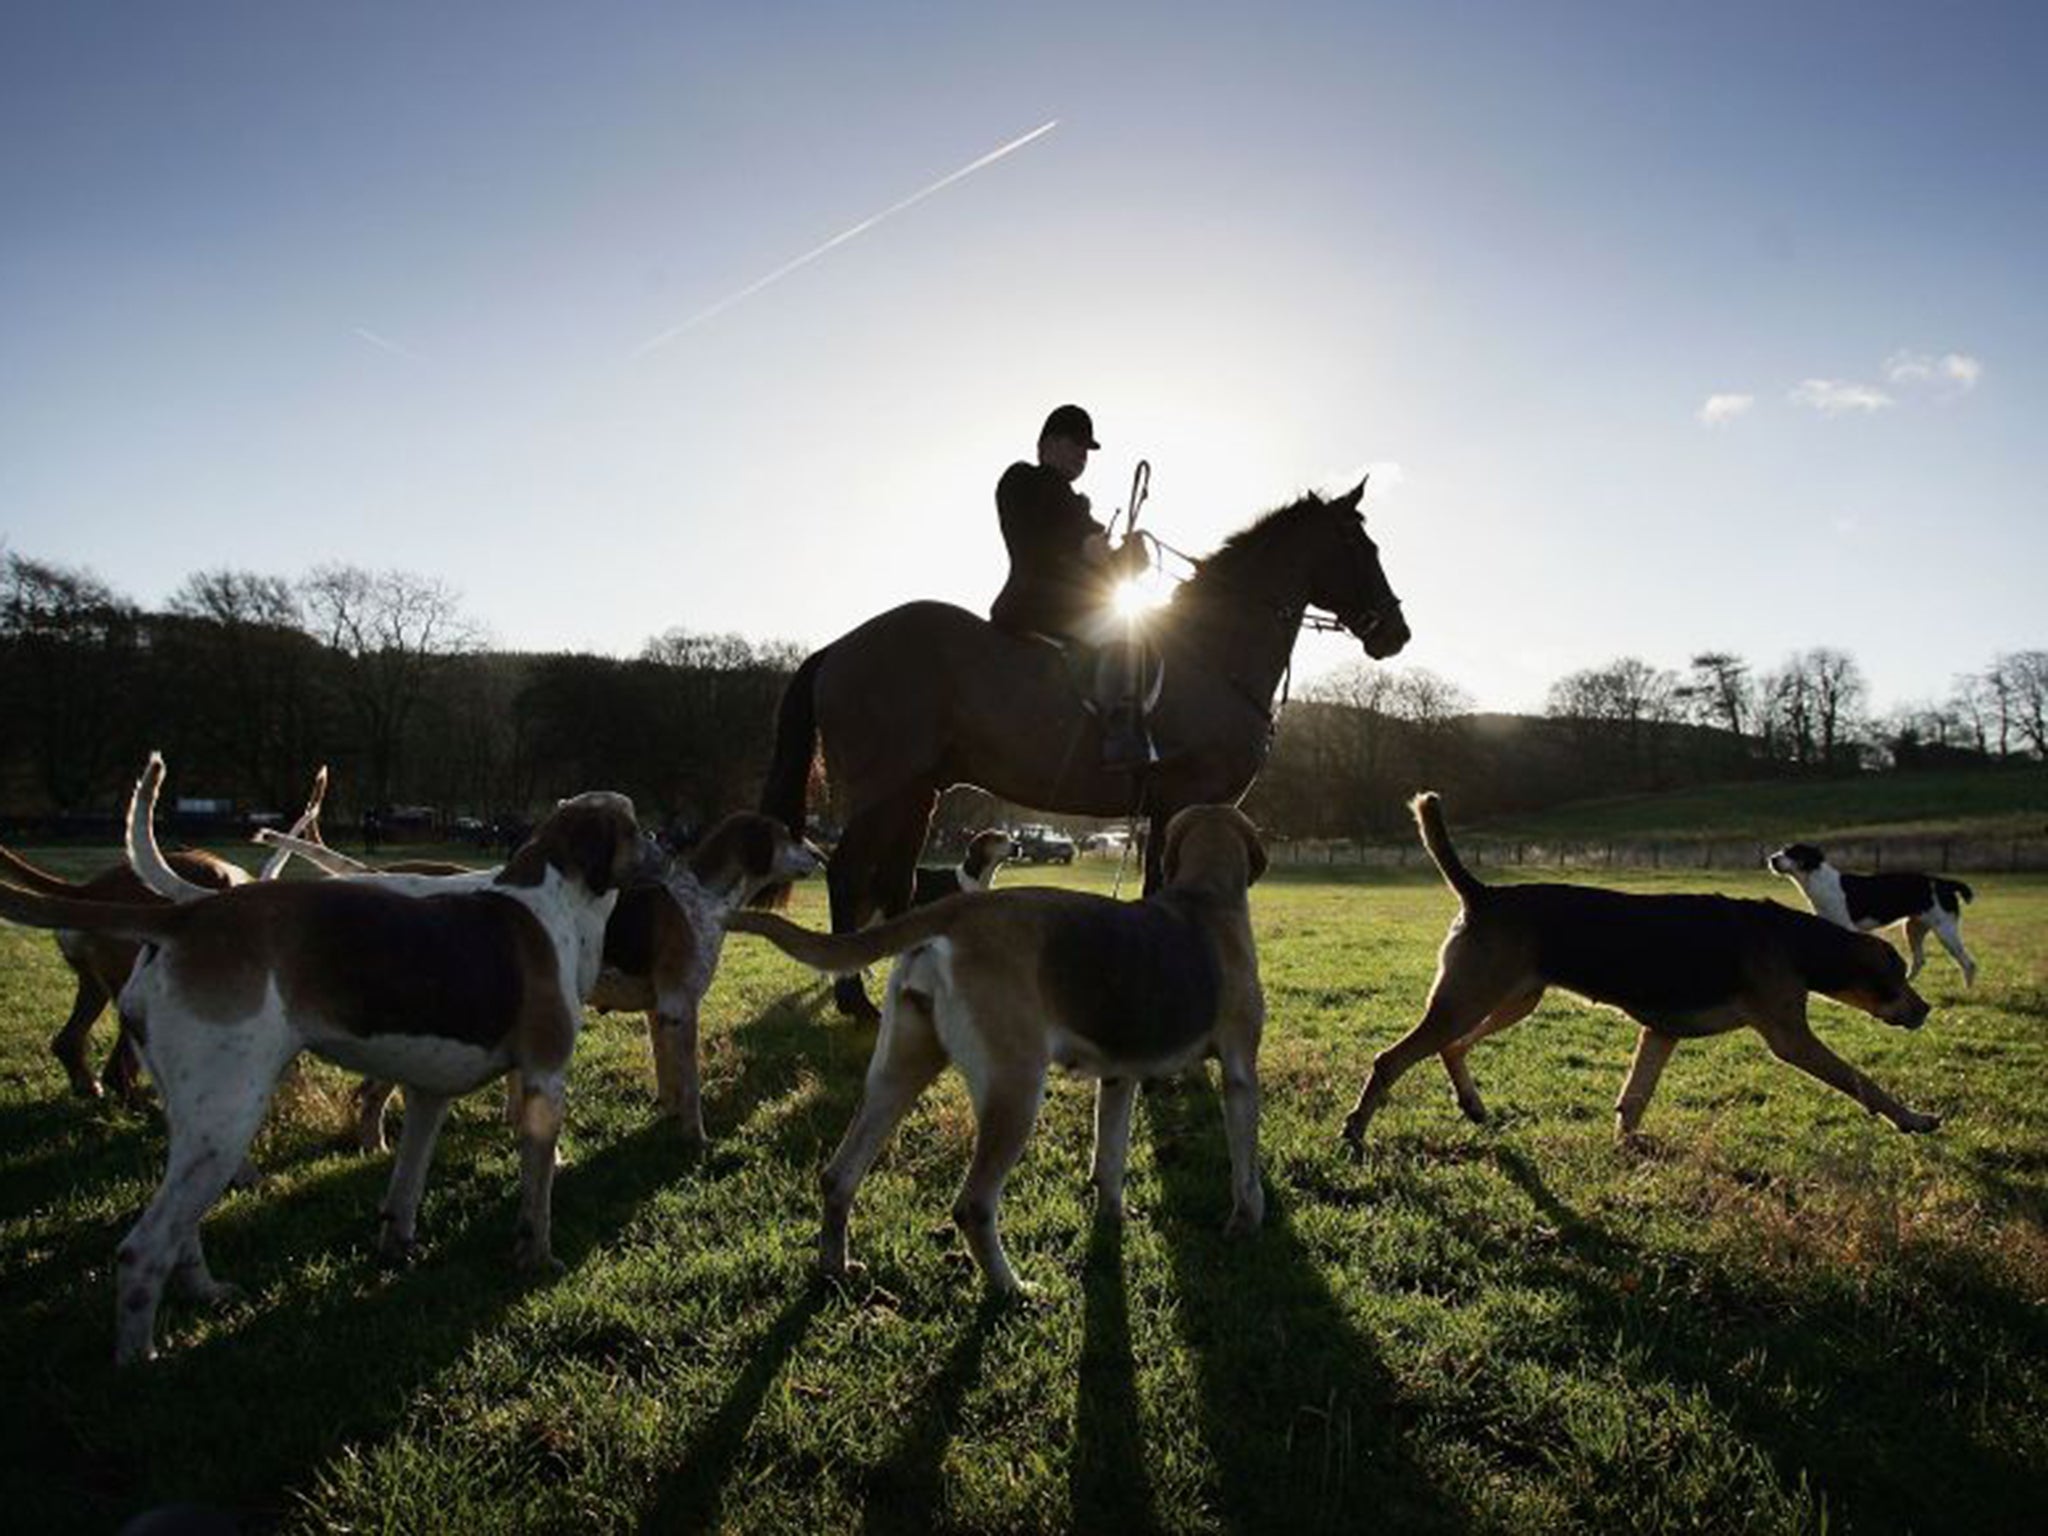 The Master and hounds of the Buccleuch Hunt in Selkirk, Scotland